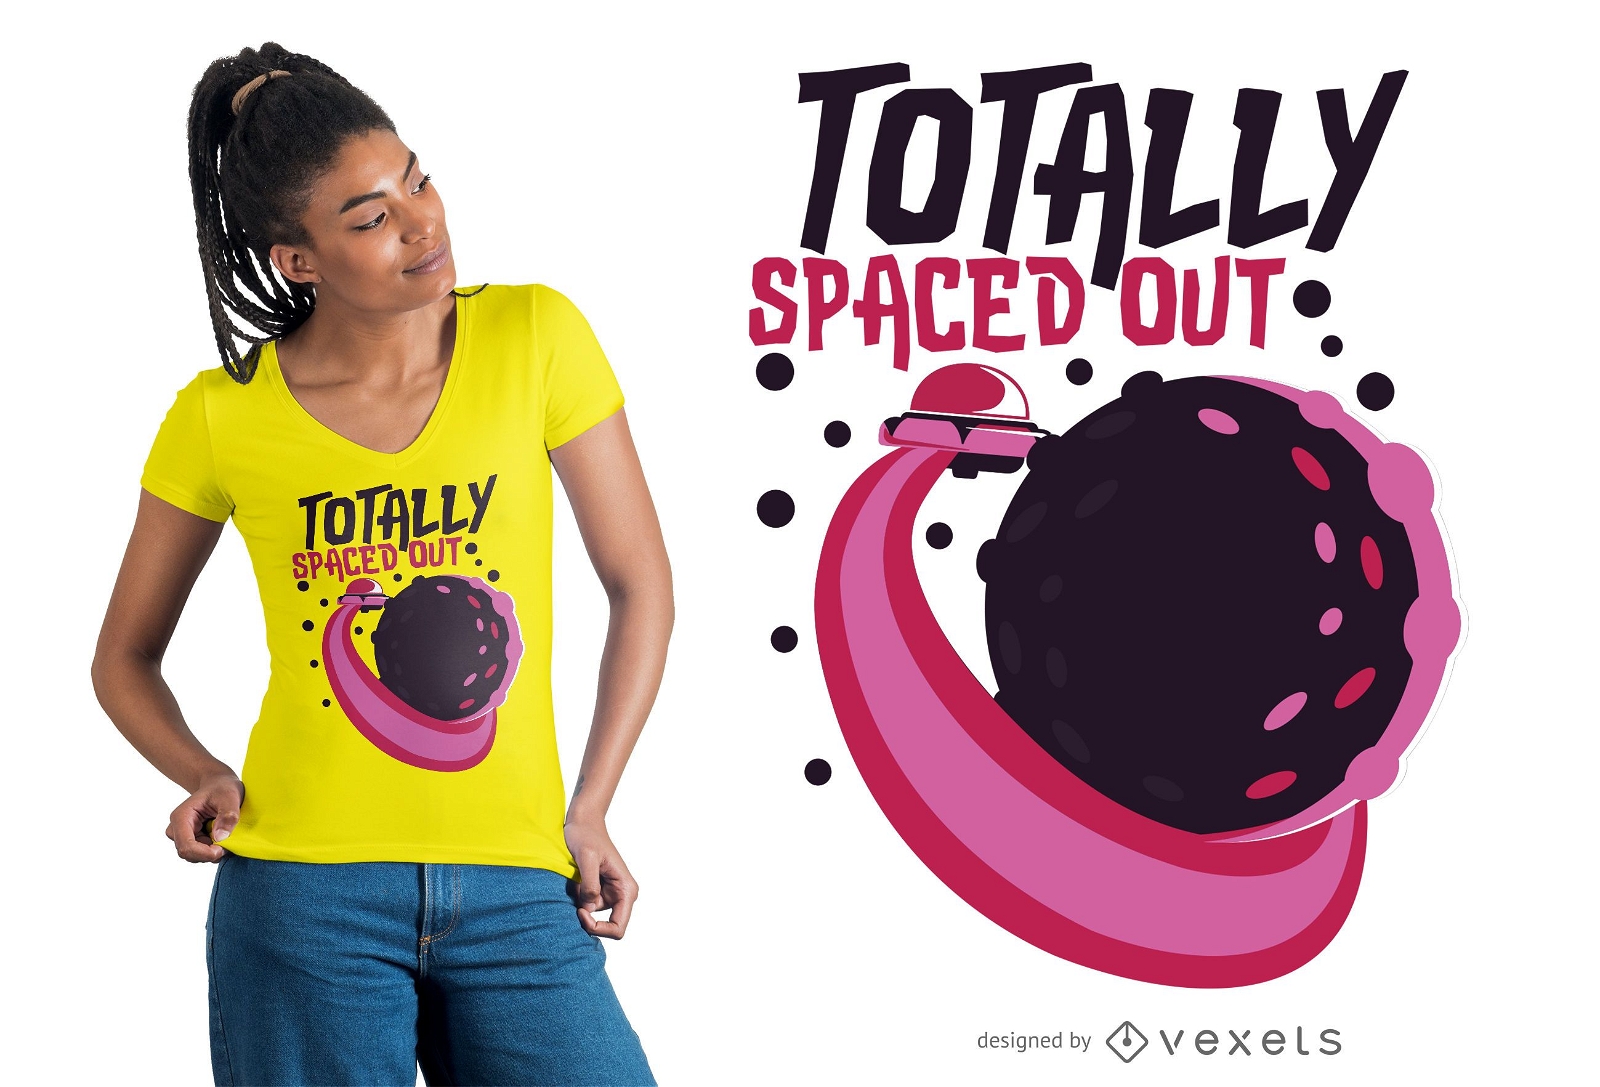 Totally spaced out t-shirt design